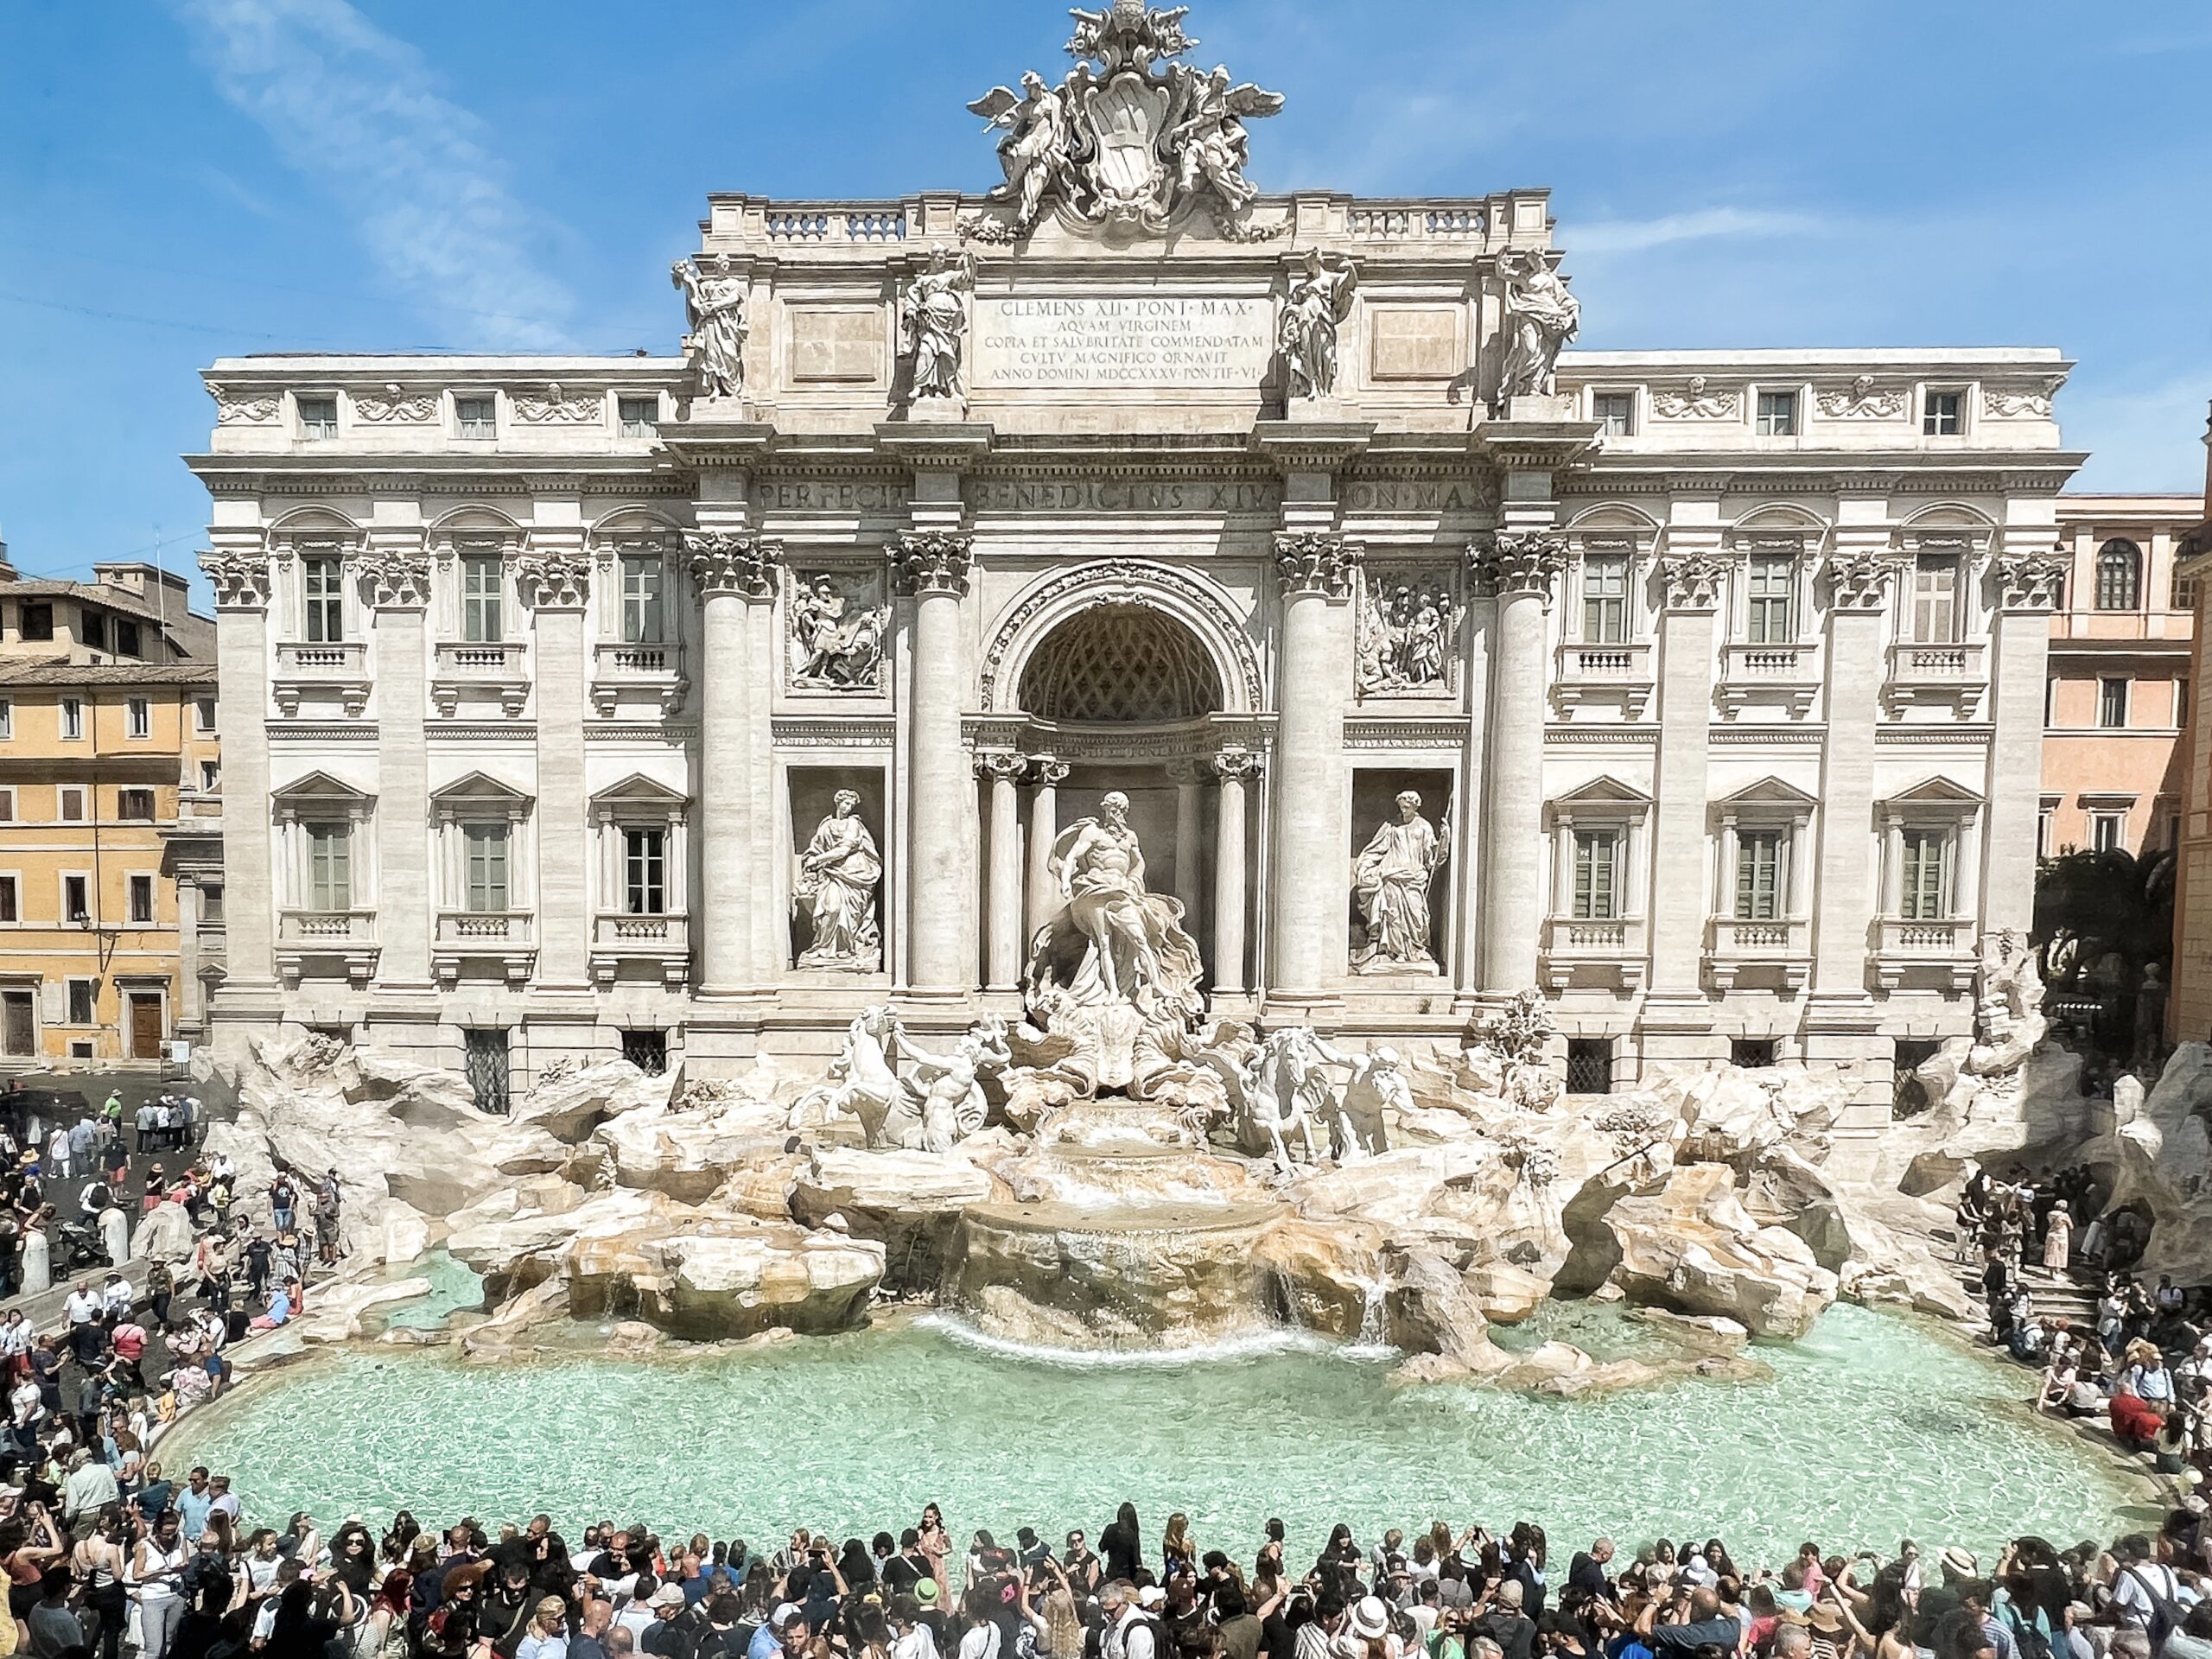 Entire view of the Trevi Fountain in Rome Italy. 36 Hours in Rome.